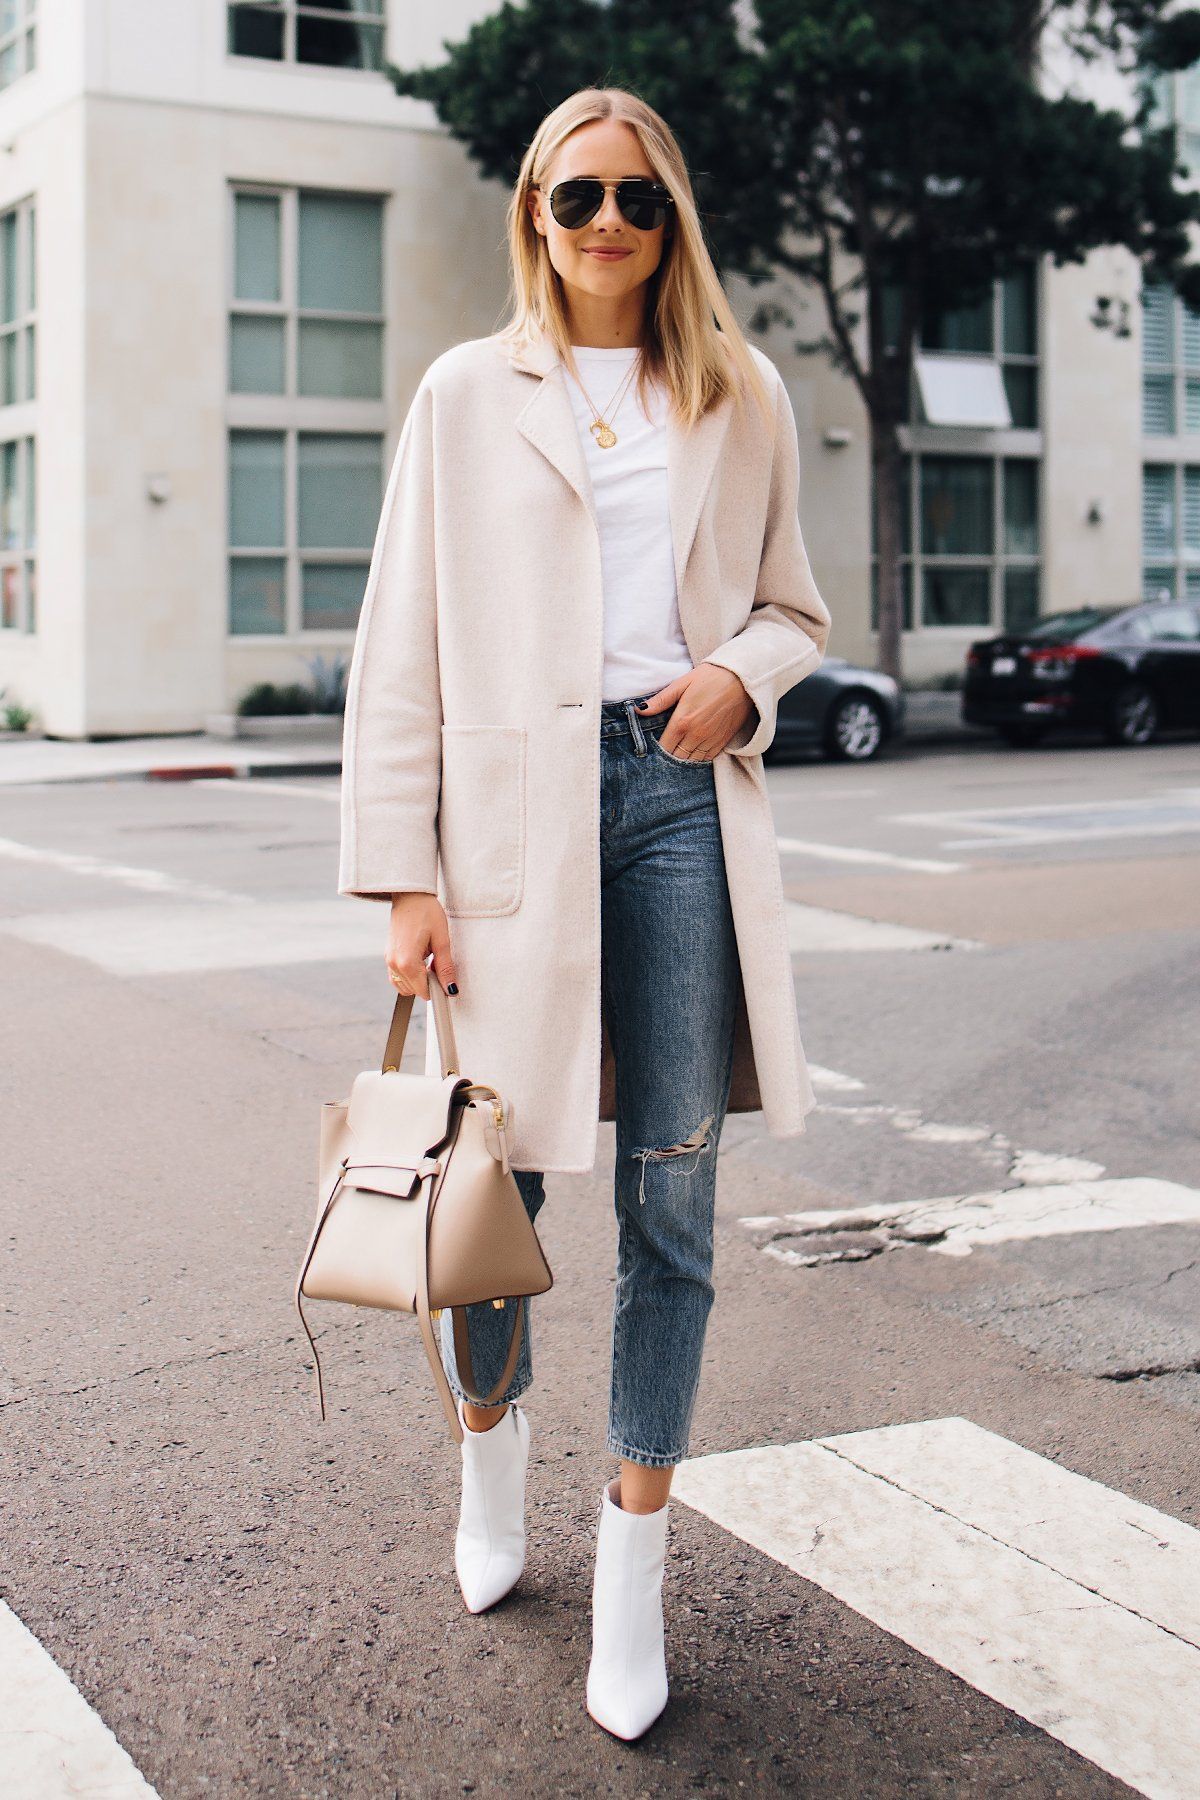 How To Wear White Ankle Booties - How To Wear White Ankle Booties -   18 street style Winter ideas